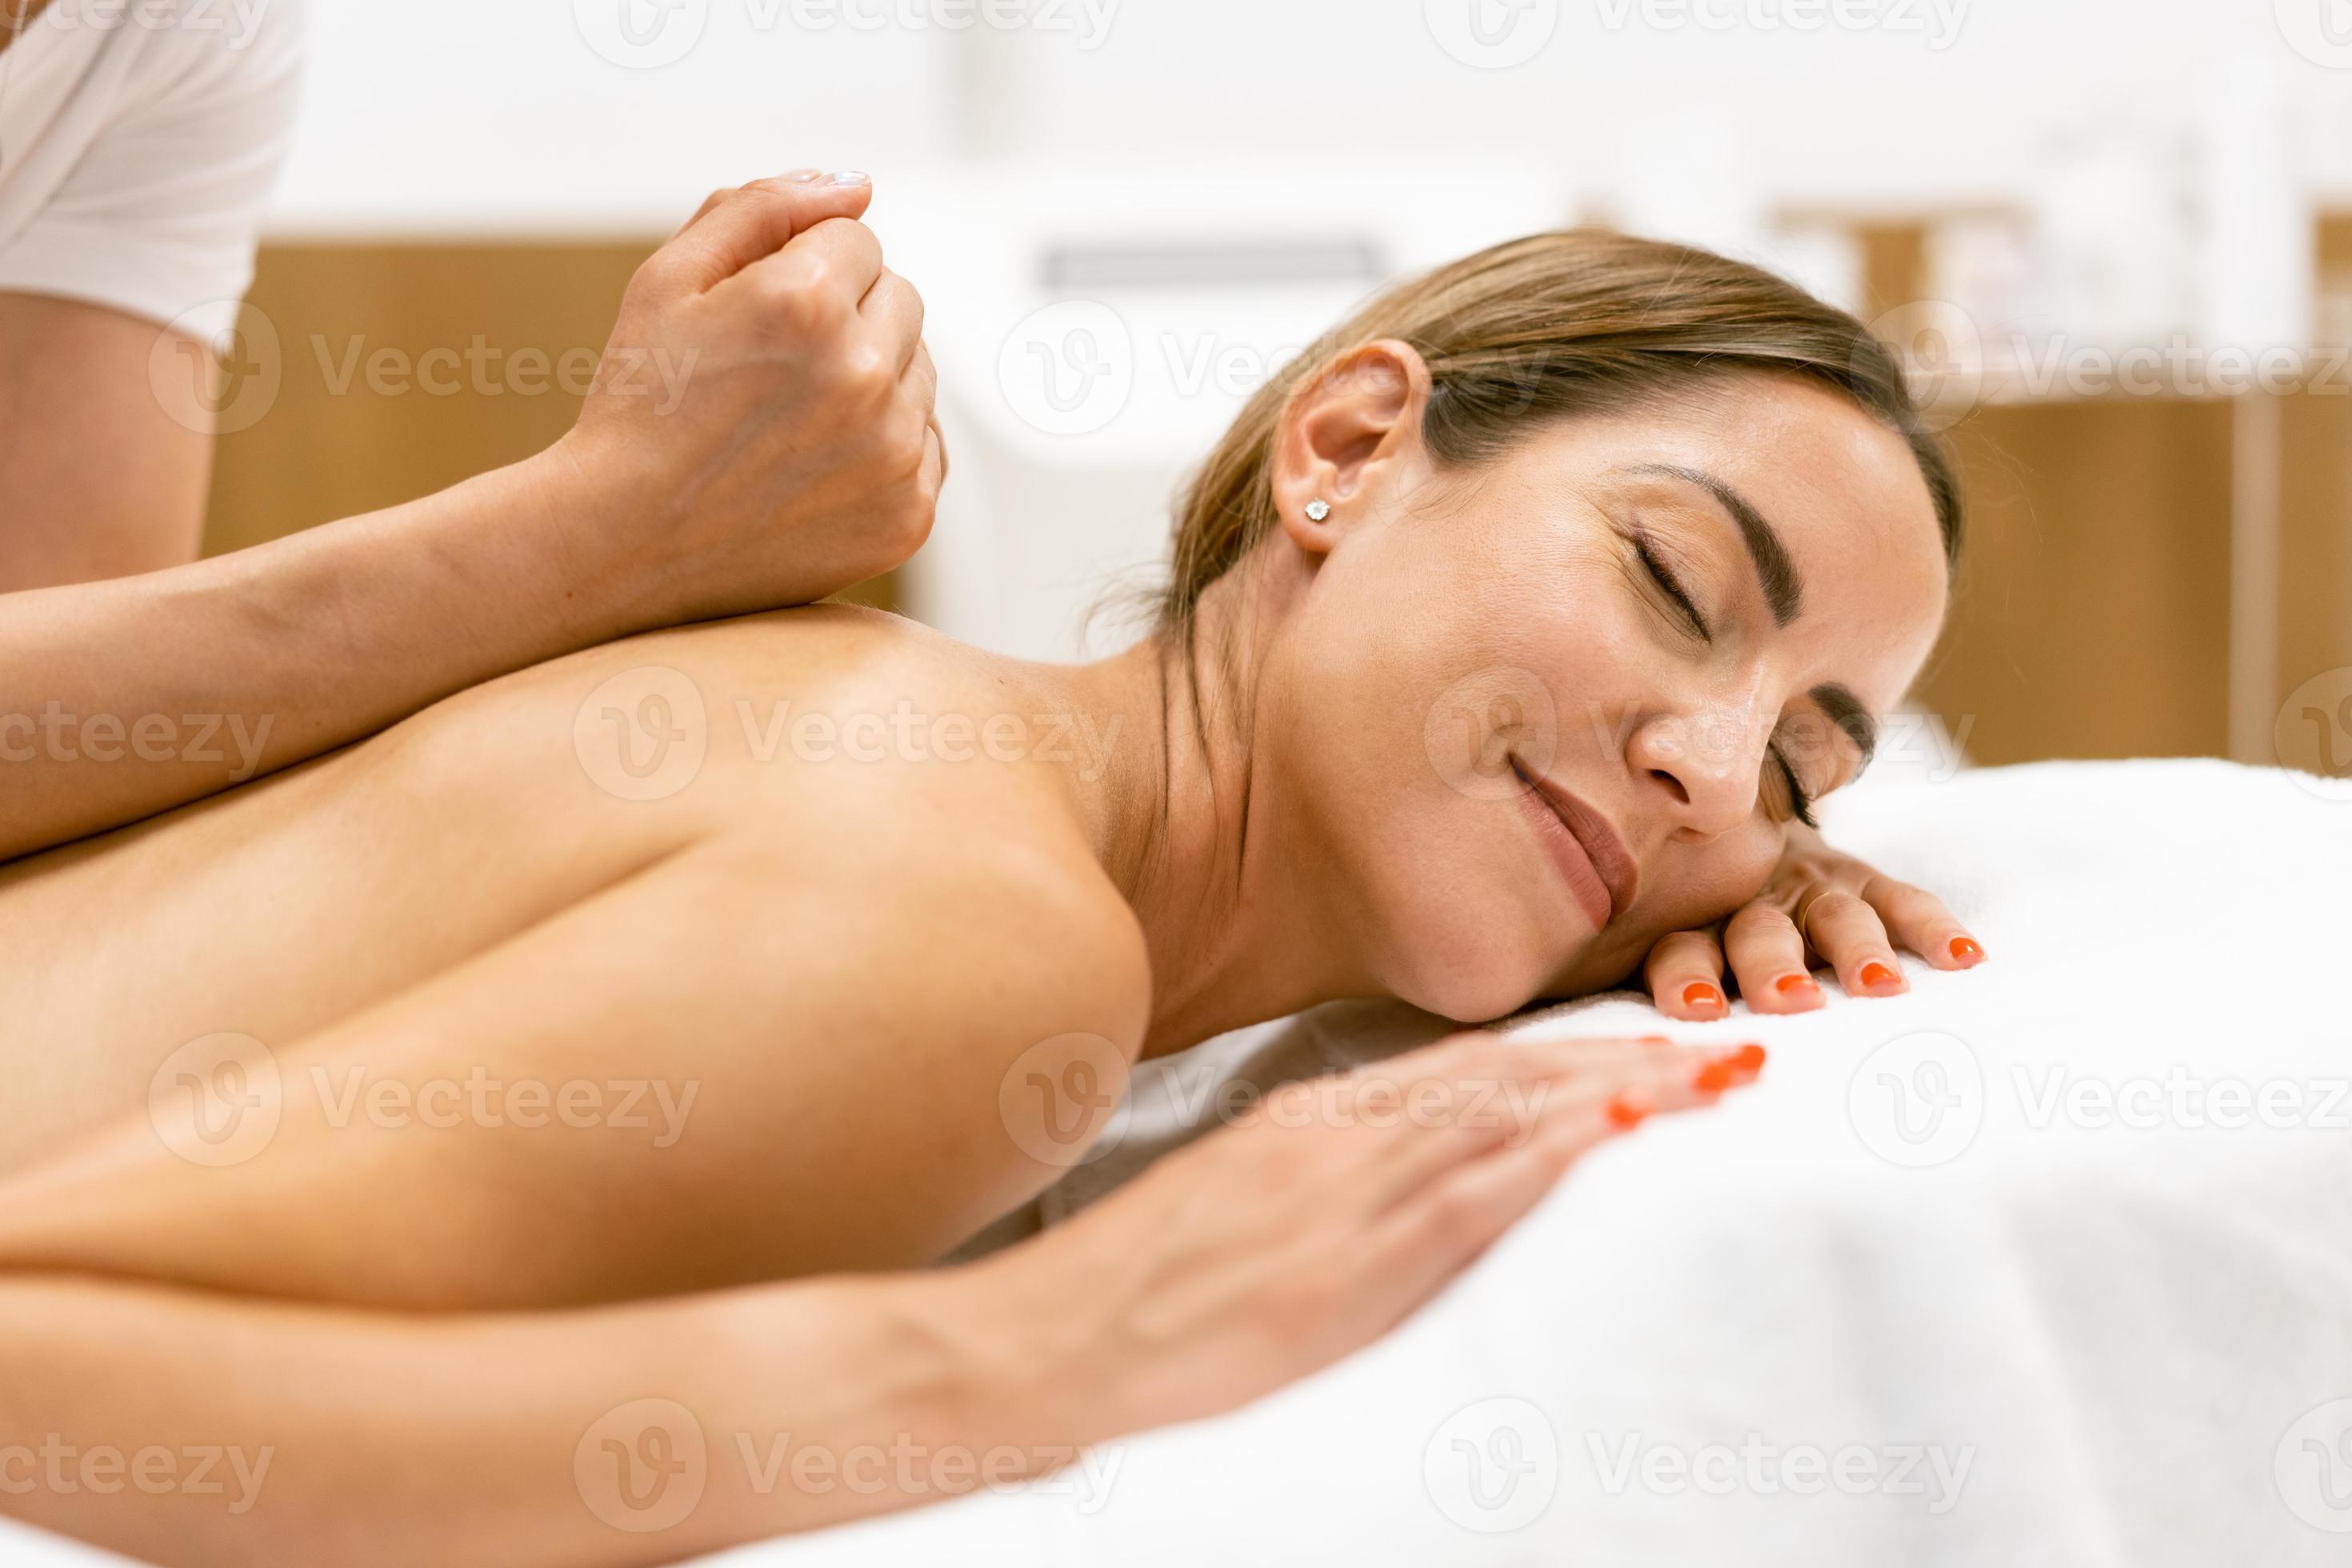 https://static.vecteezy.com/system/resources/previews/004/675/724/large_2x/middle-aged-woman-having-a-back-massage-in-a-beauty-salon-photo.jpg